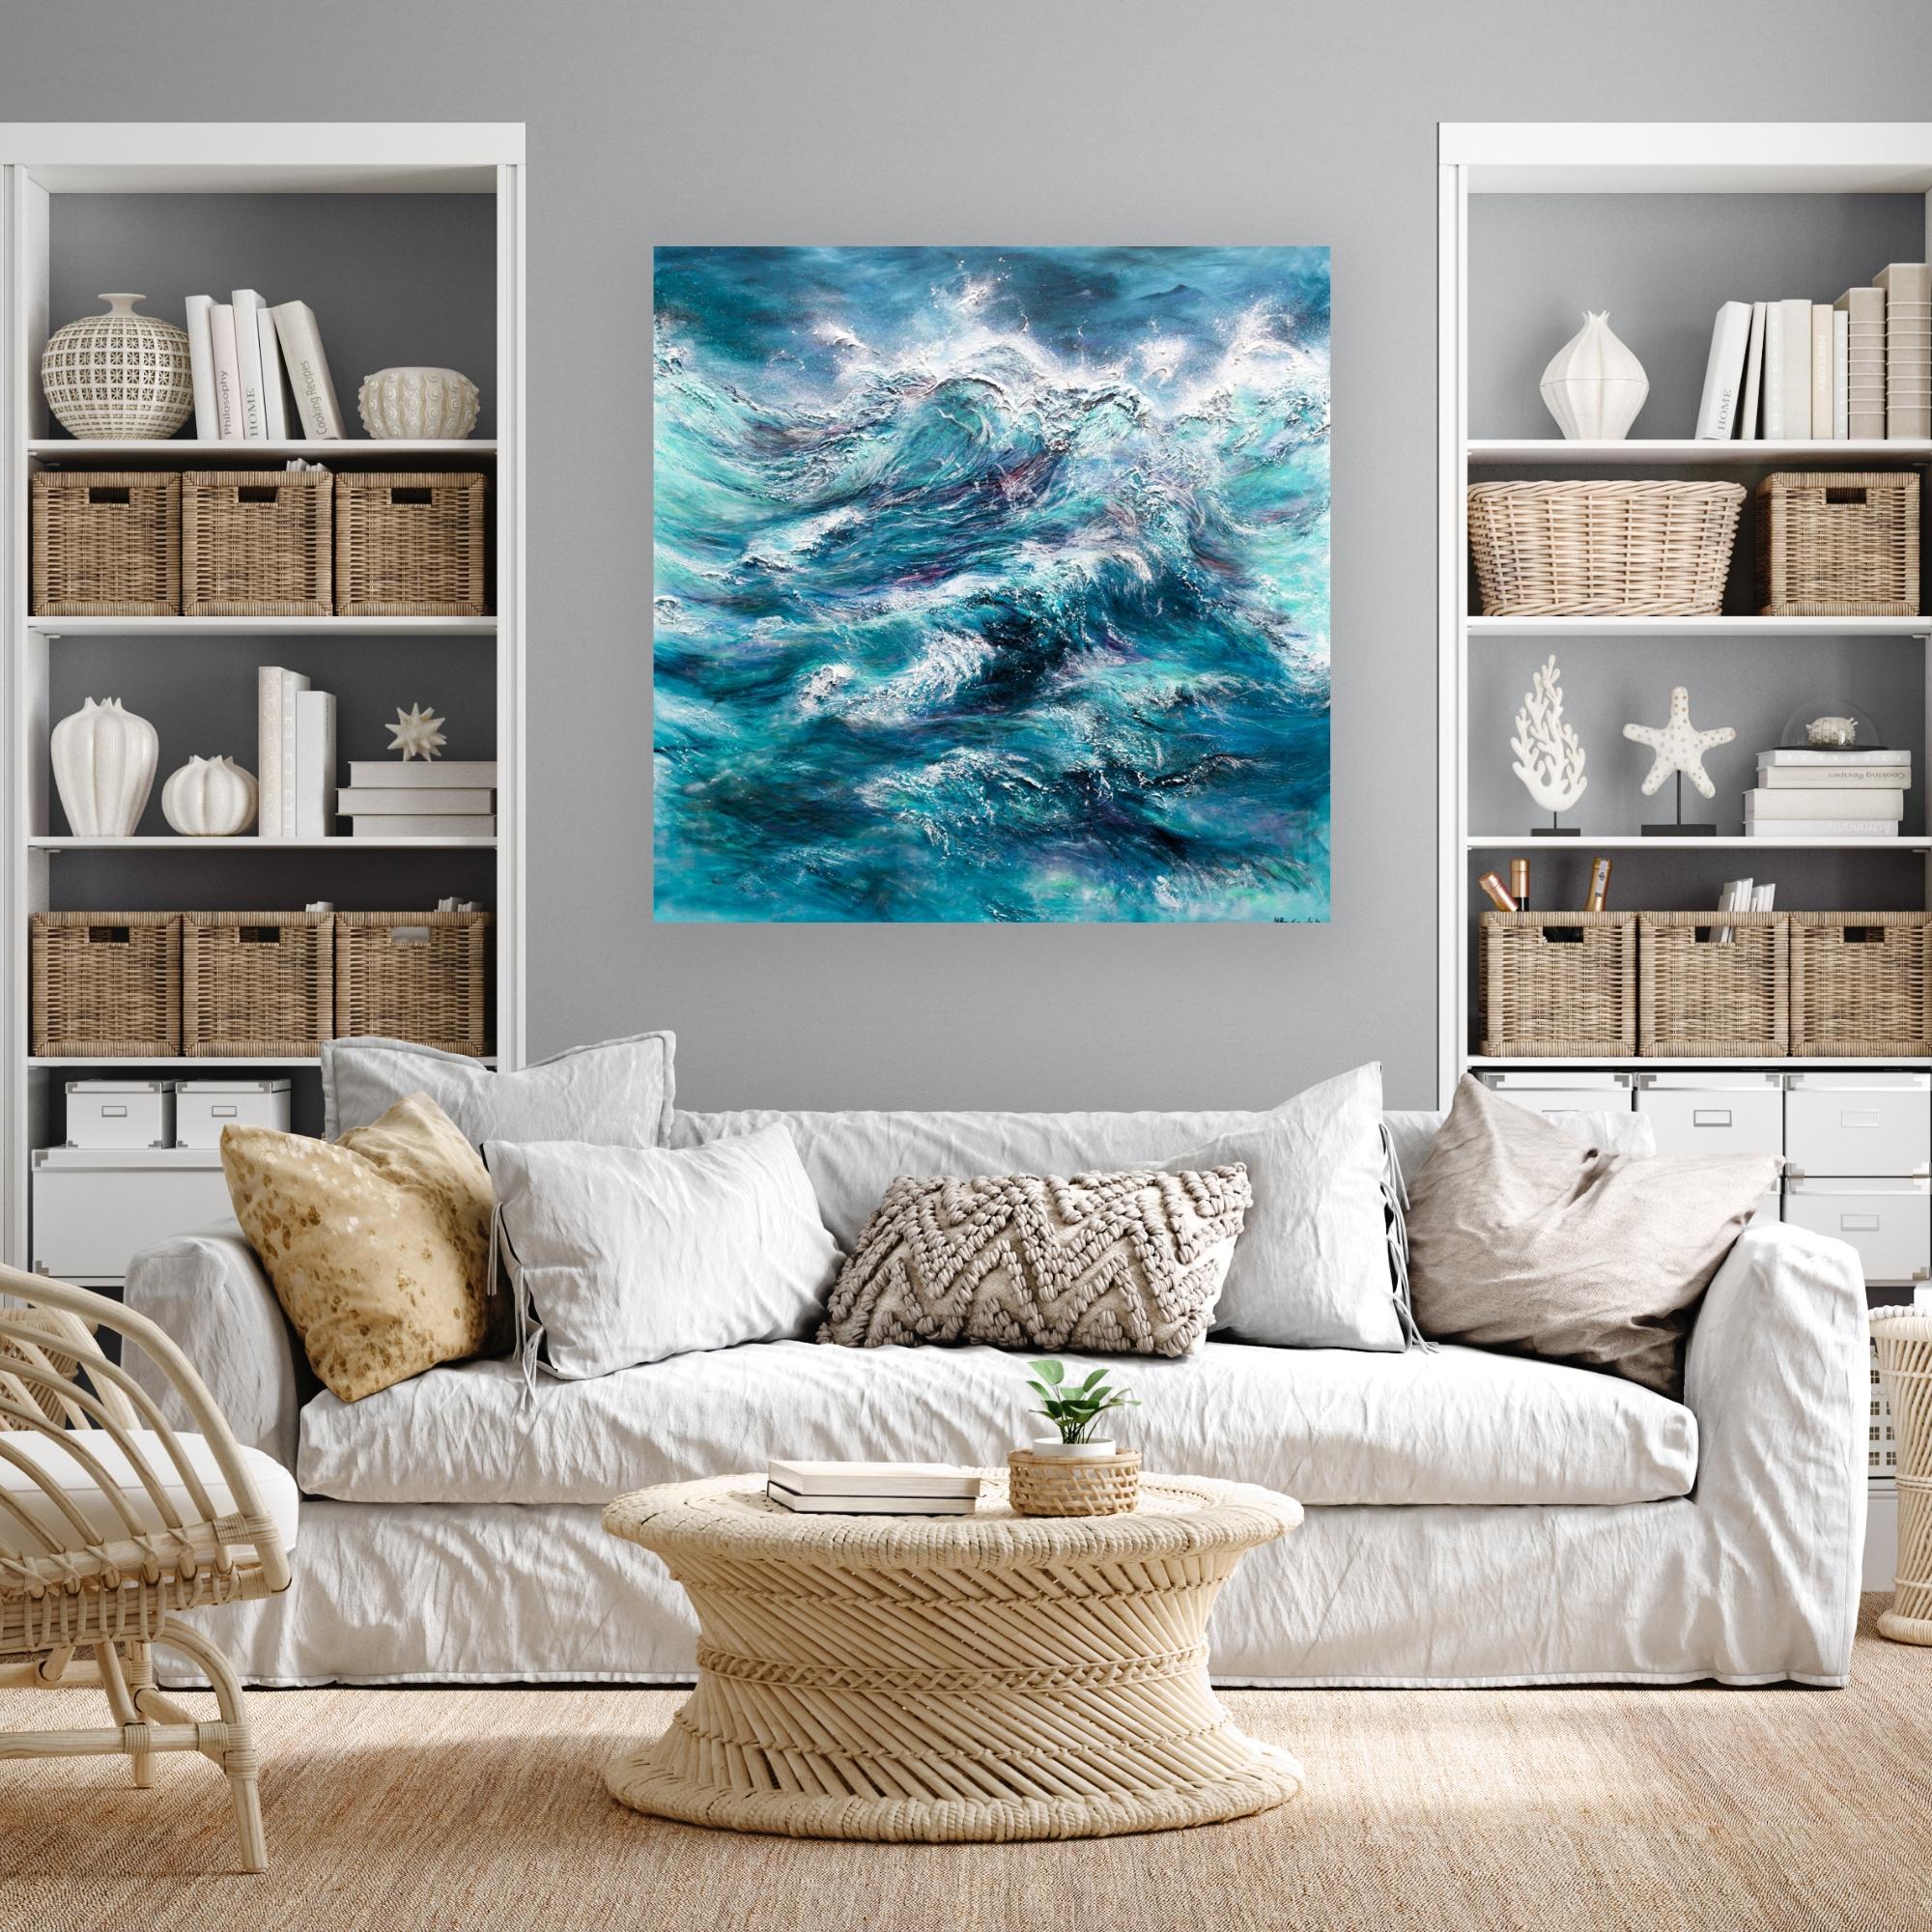 Wild Waters-original modern impressionsm seascape oil painting-contemporary Art - Painting by Nikki Baxendale